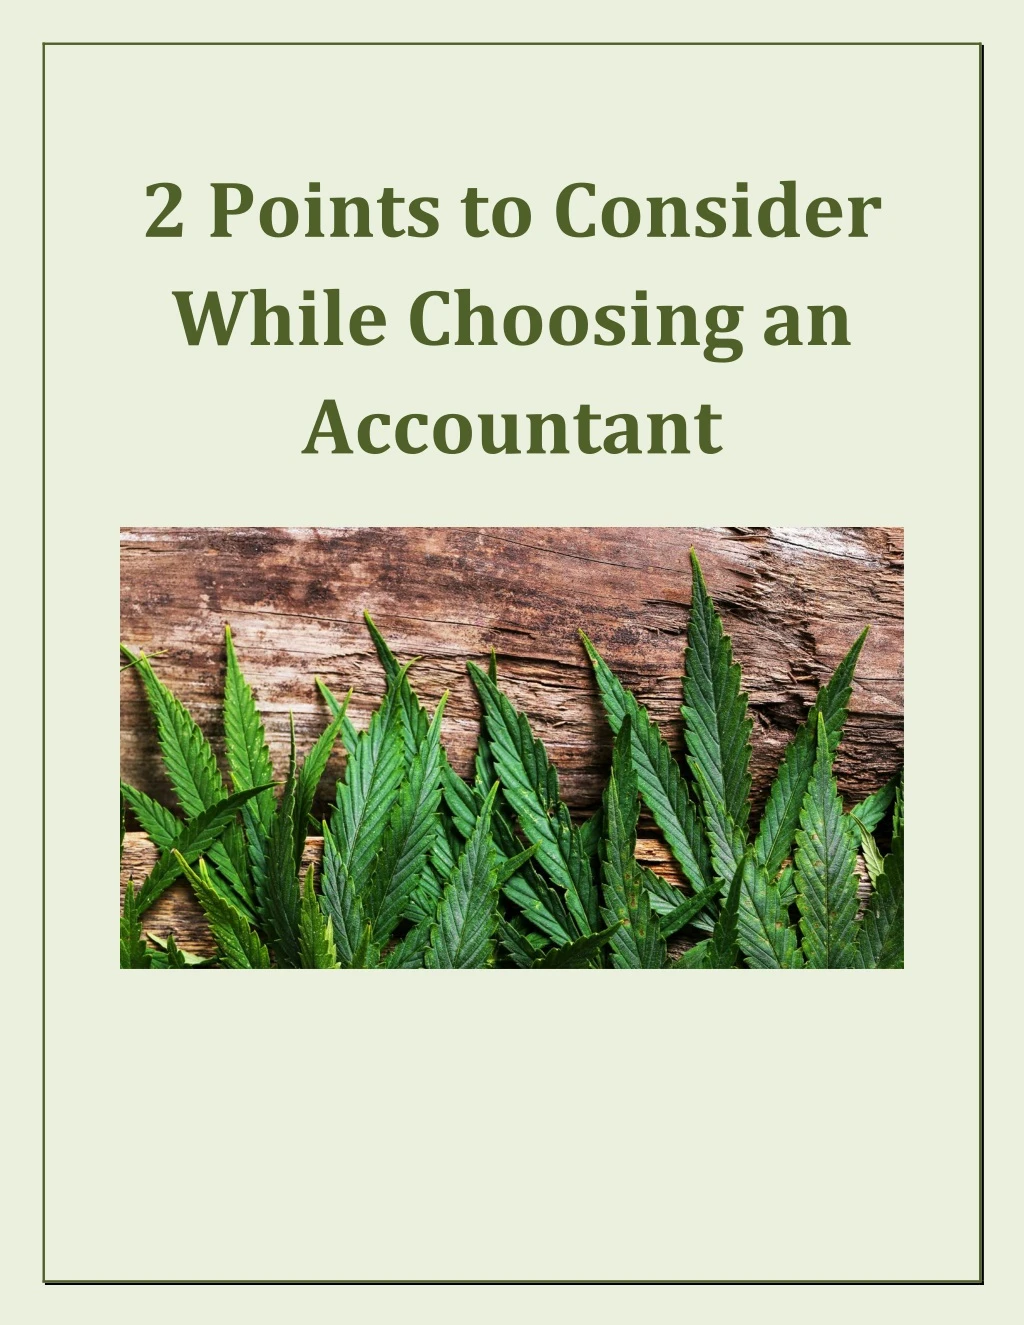 2 points to consider while choosing an accountant